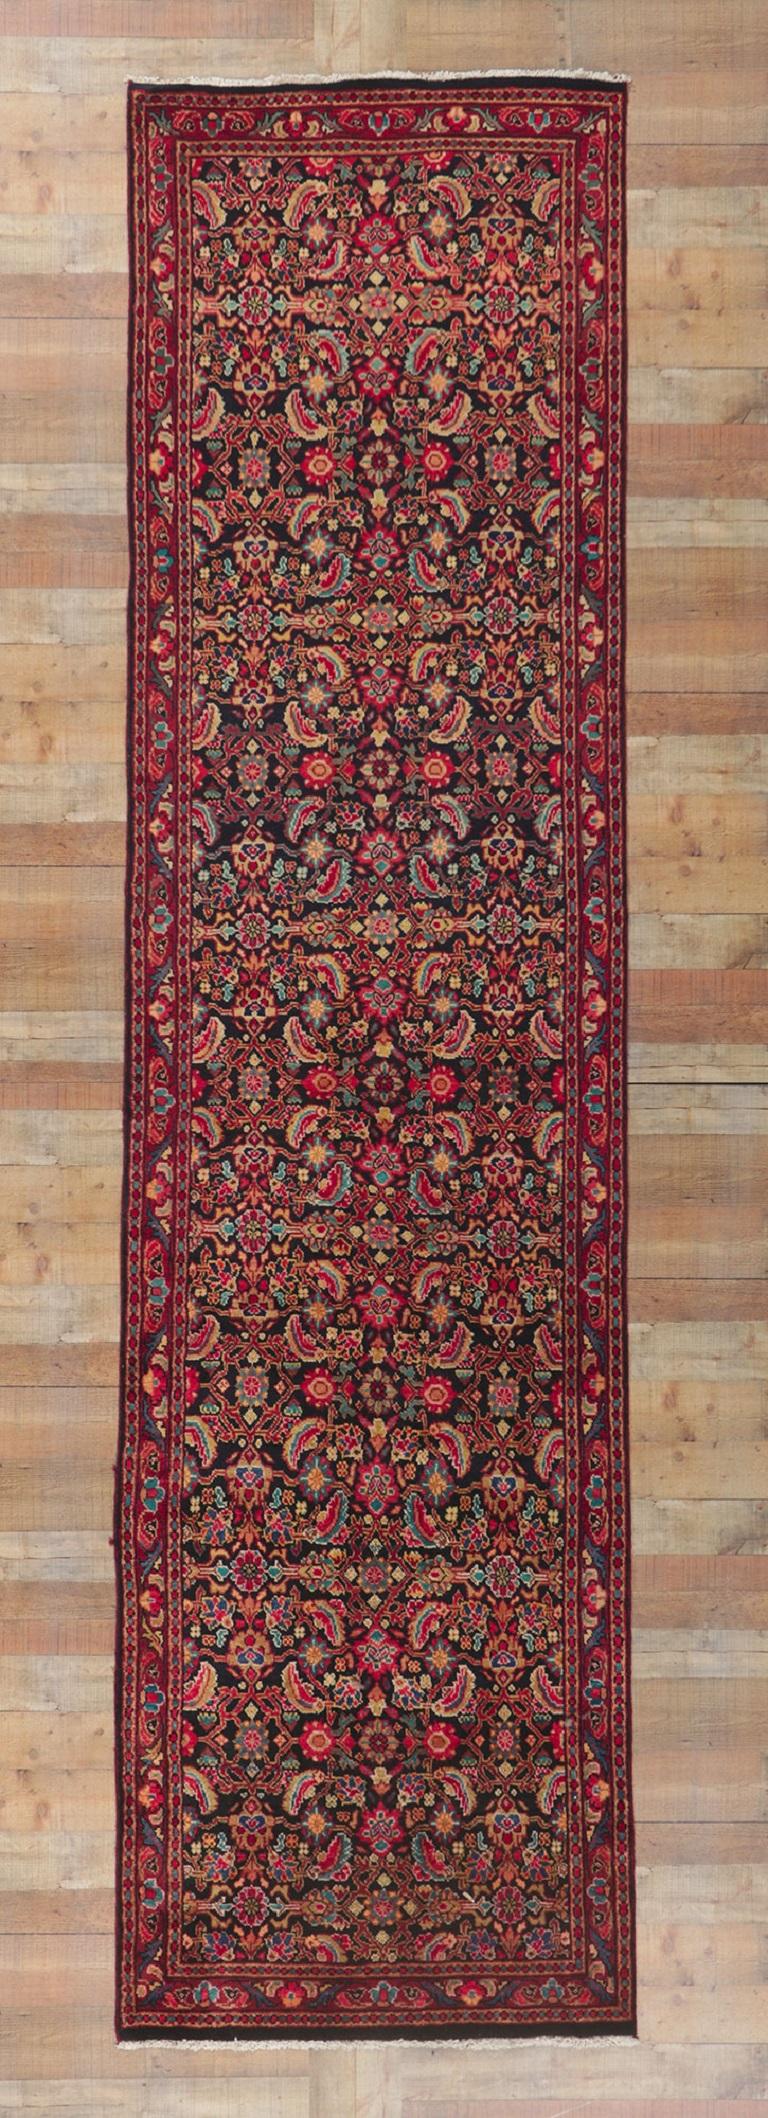 Antique Persian Mahal Runner with Herati Pattern In Good Condition For Sale In Dallas, TX